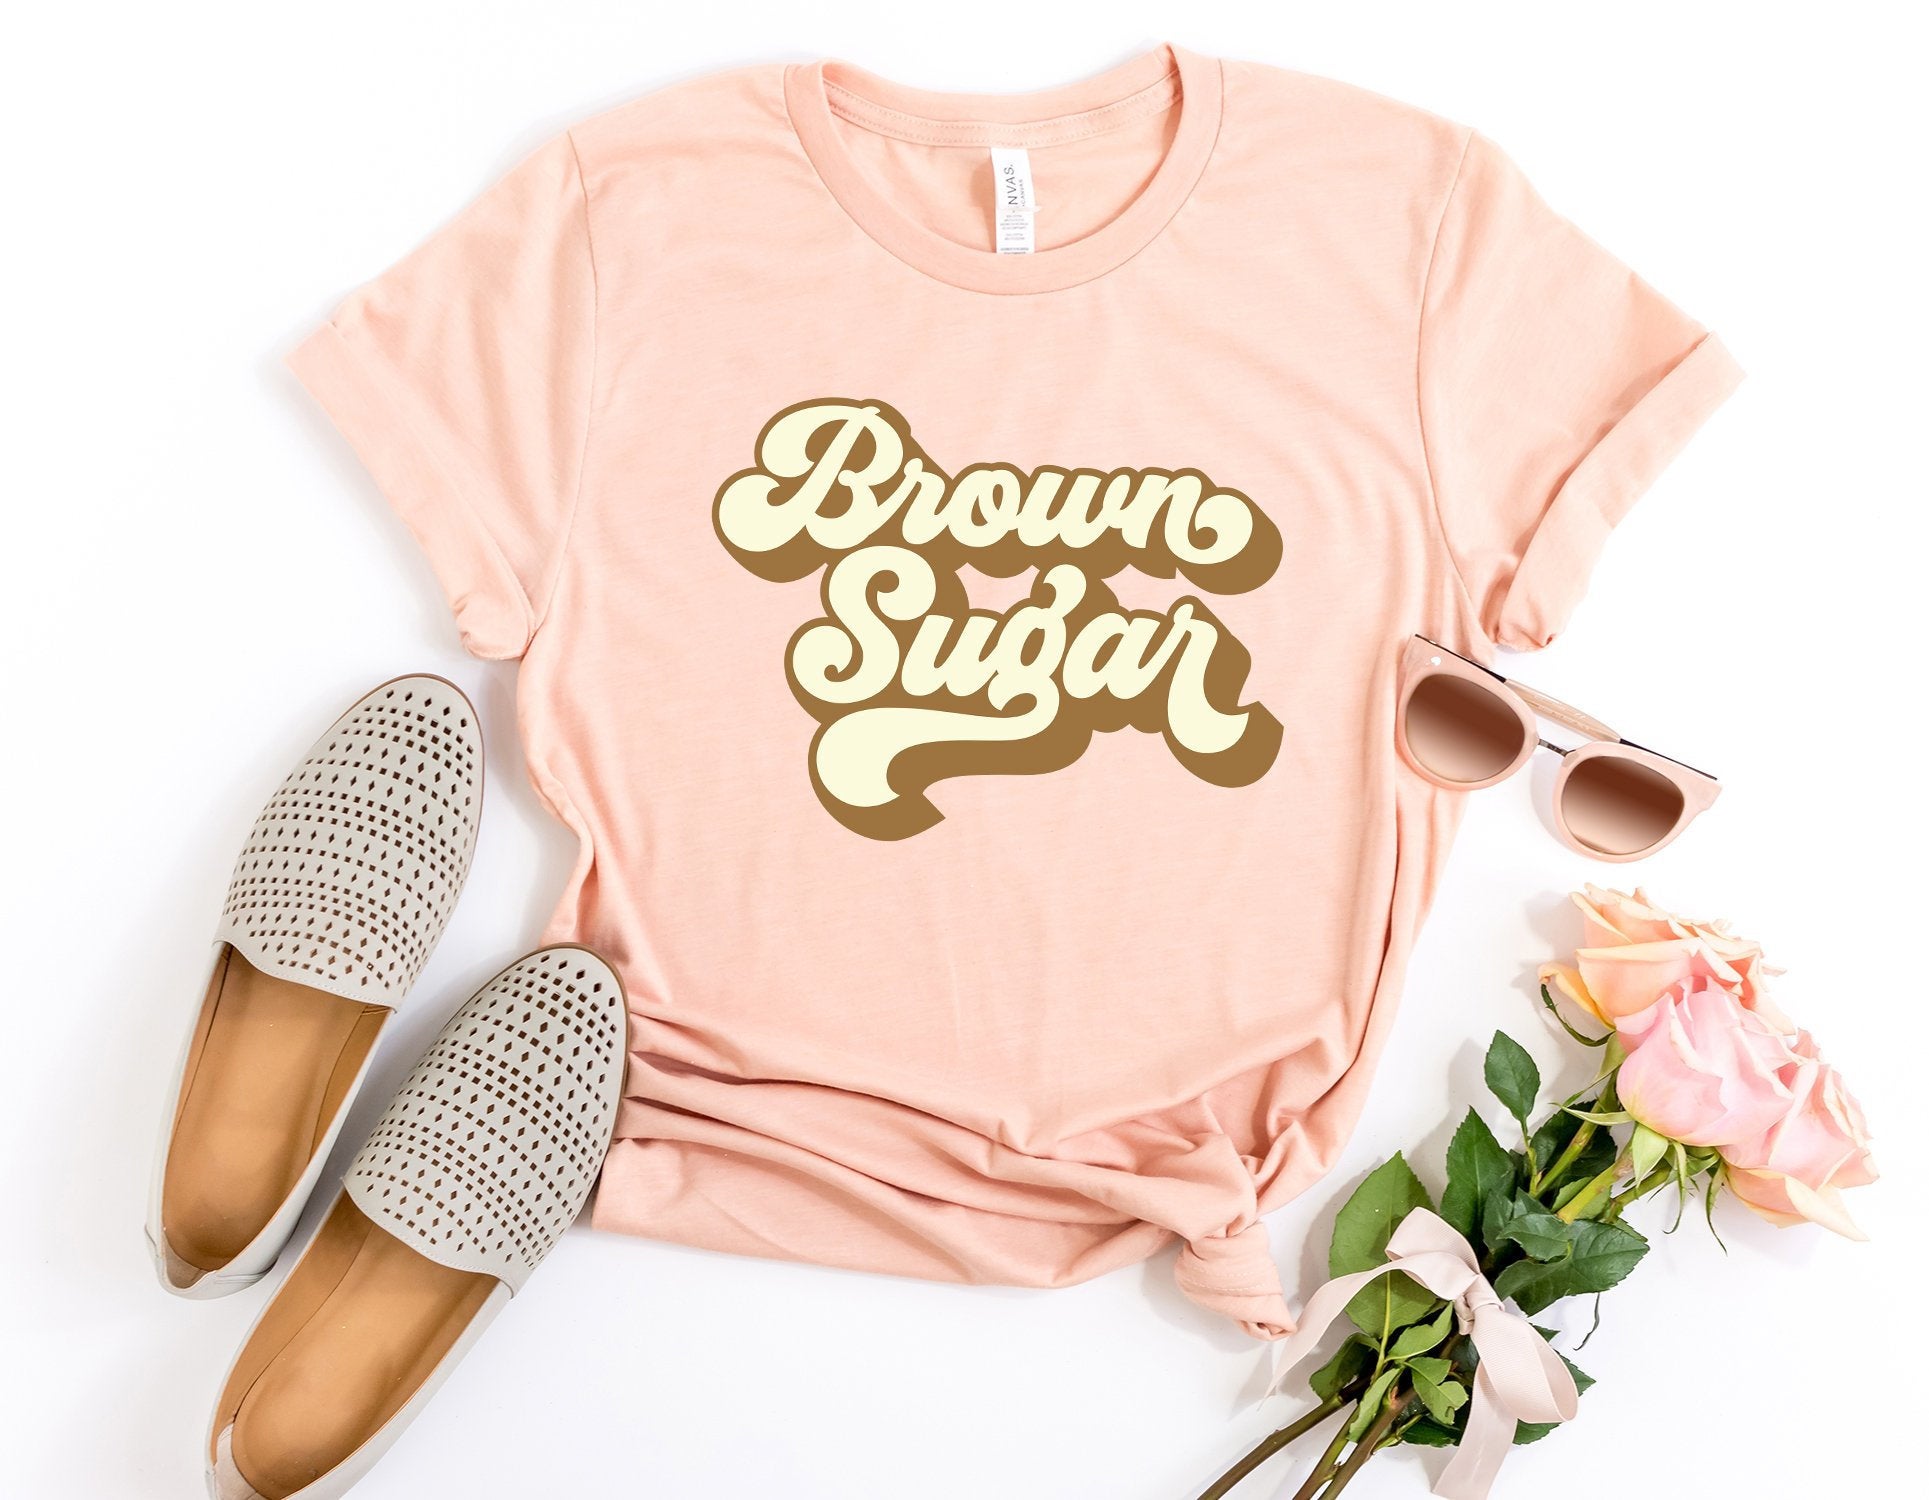 The 10 T-Shirts You Need to Celebrate Your Melanin at Essence Festival